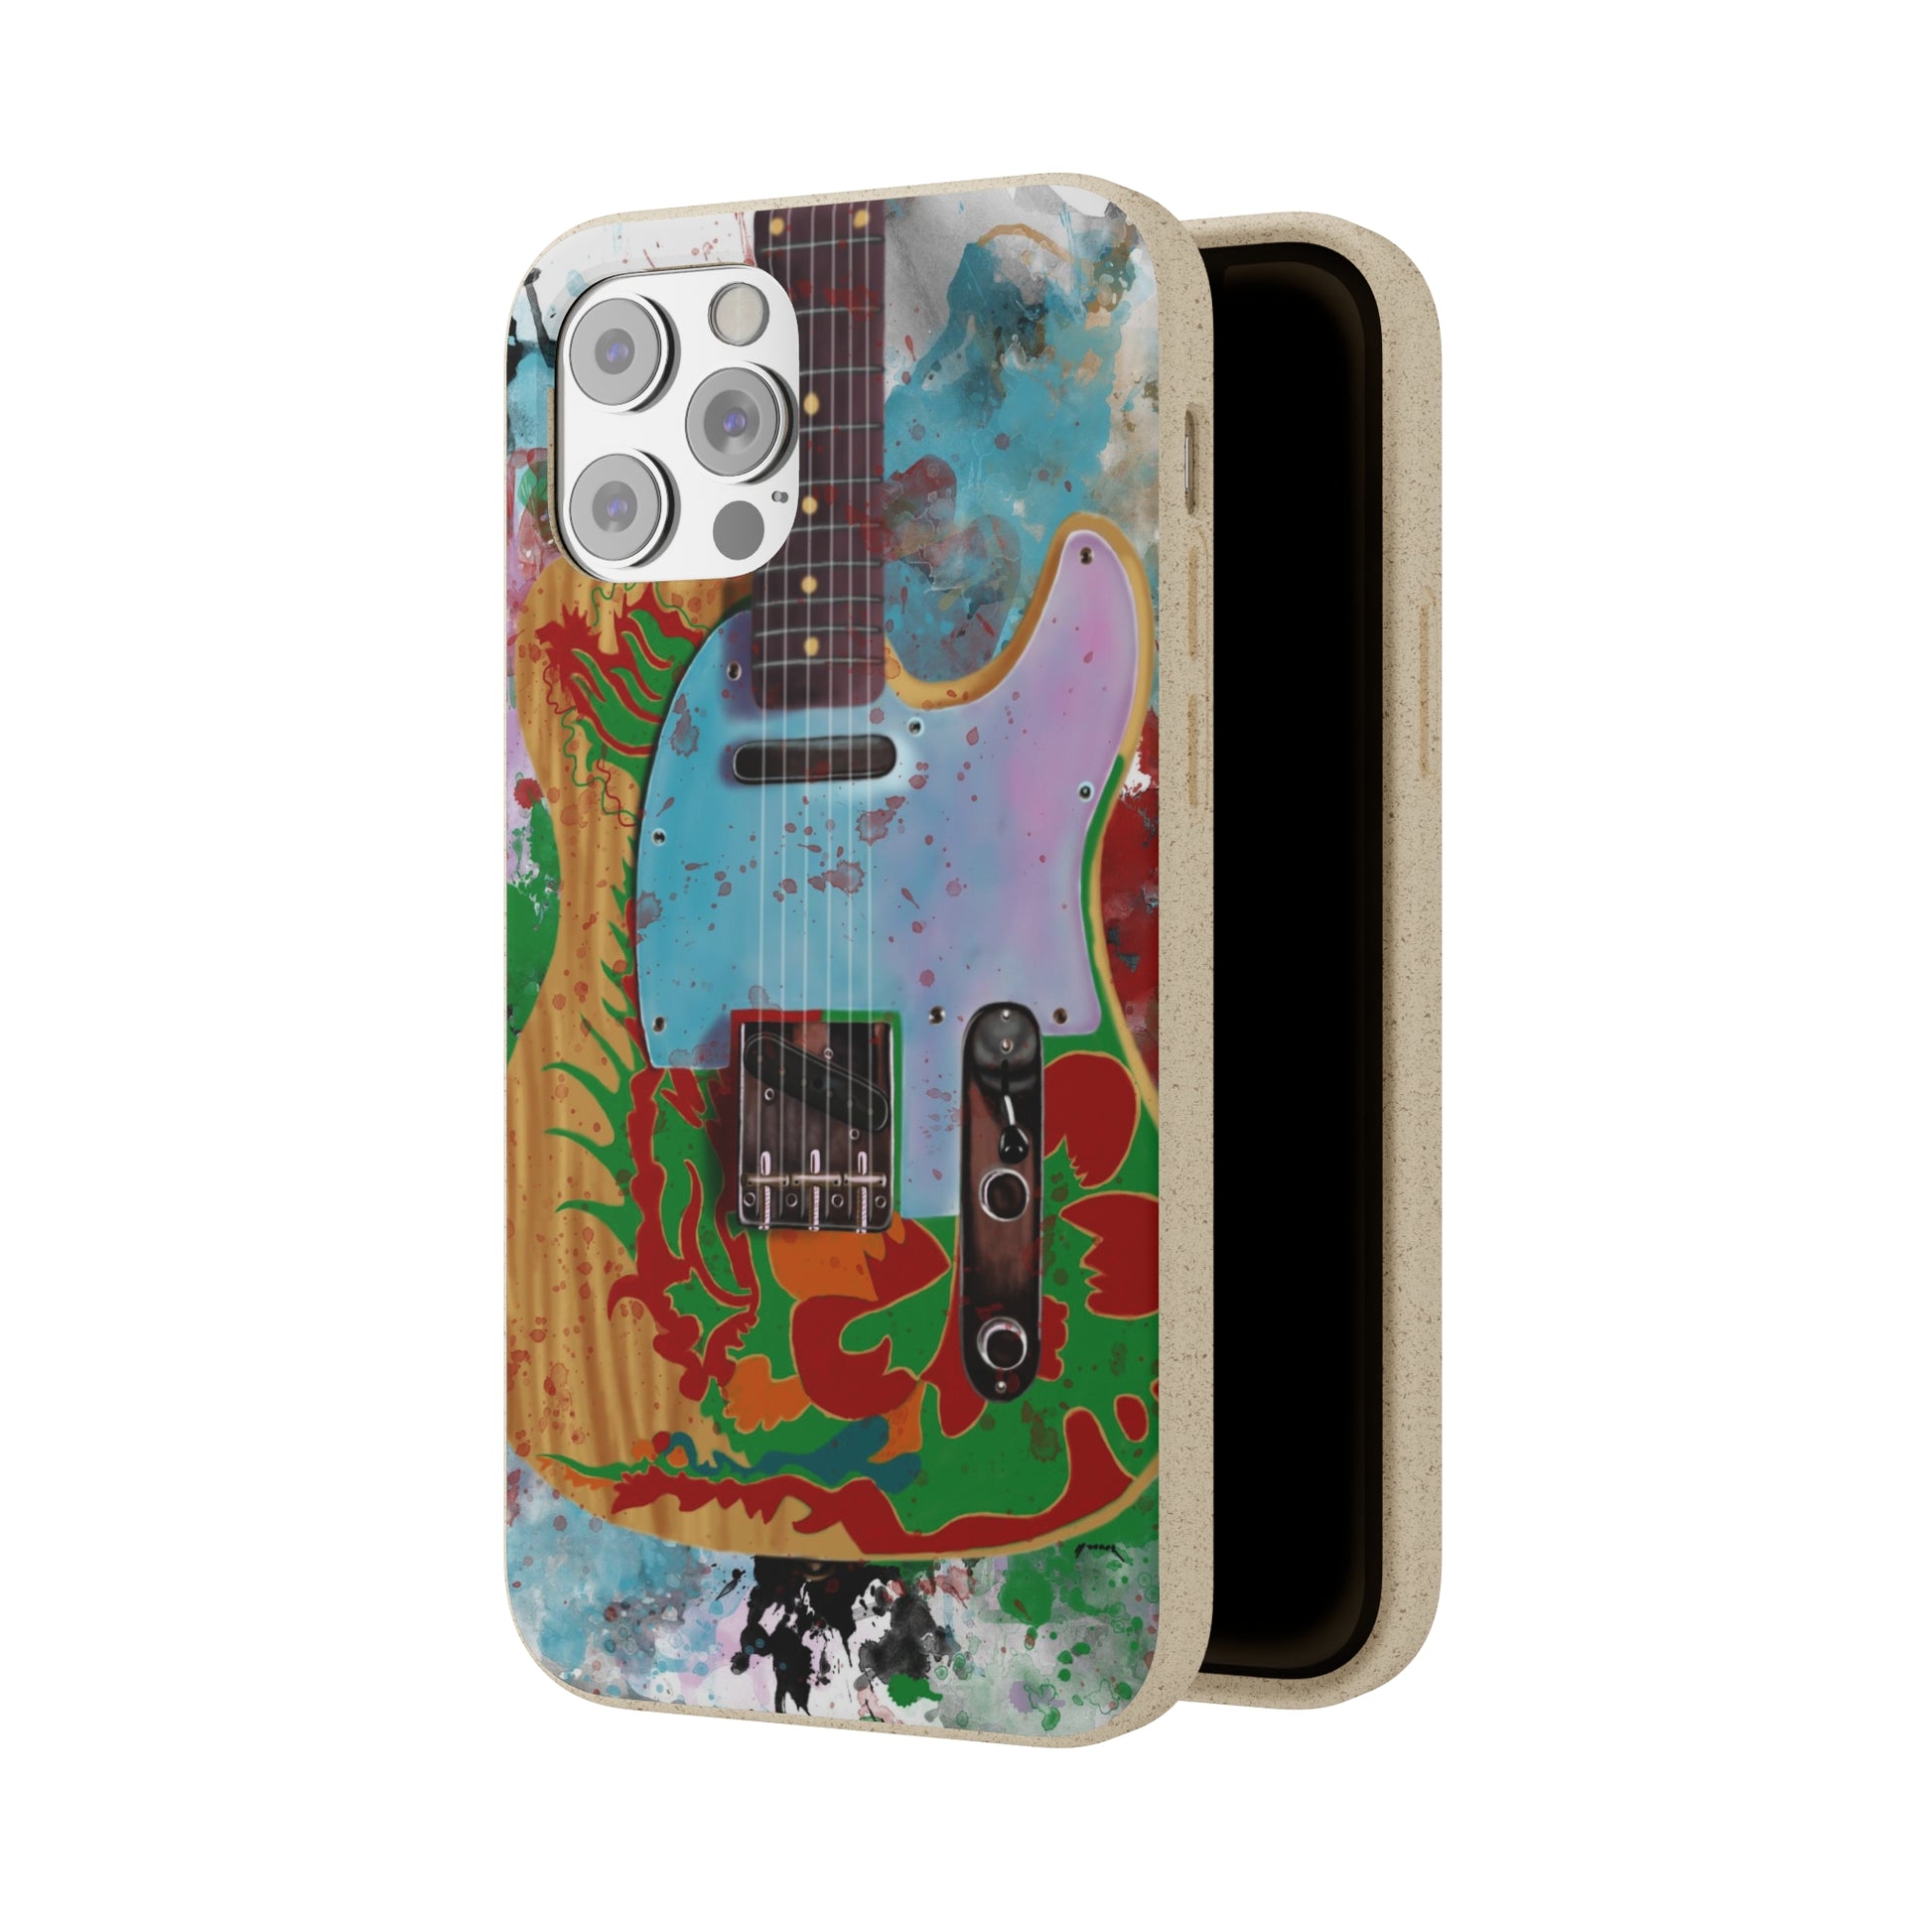 digital painting of a colorful electric guitar printed on a biodegradable iphone phone case